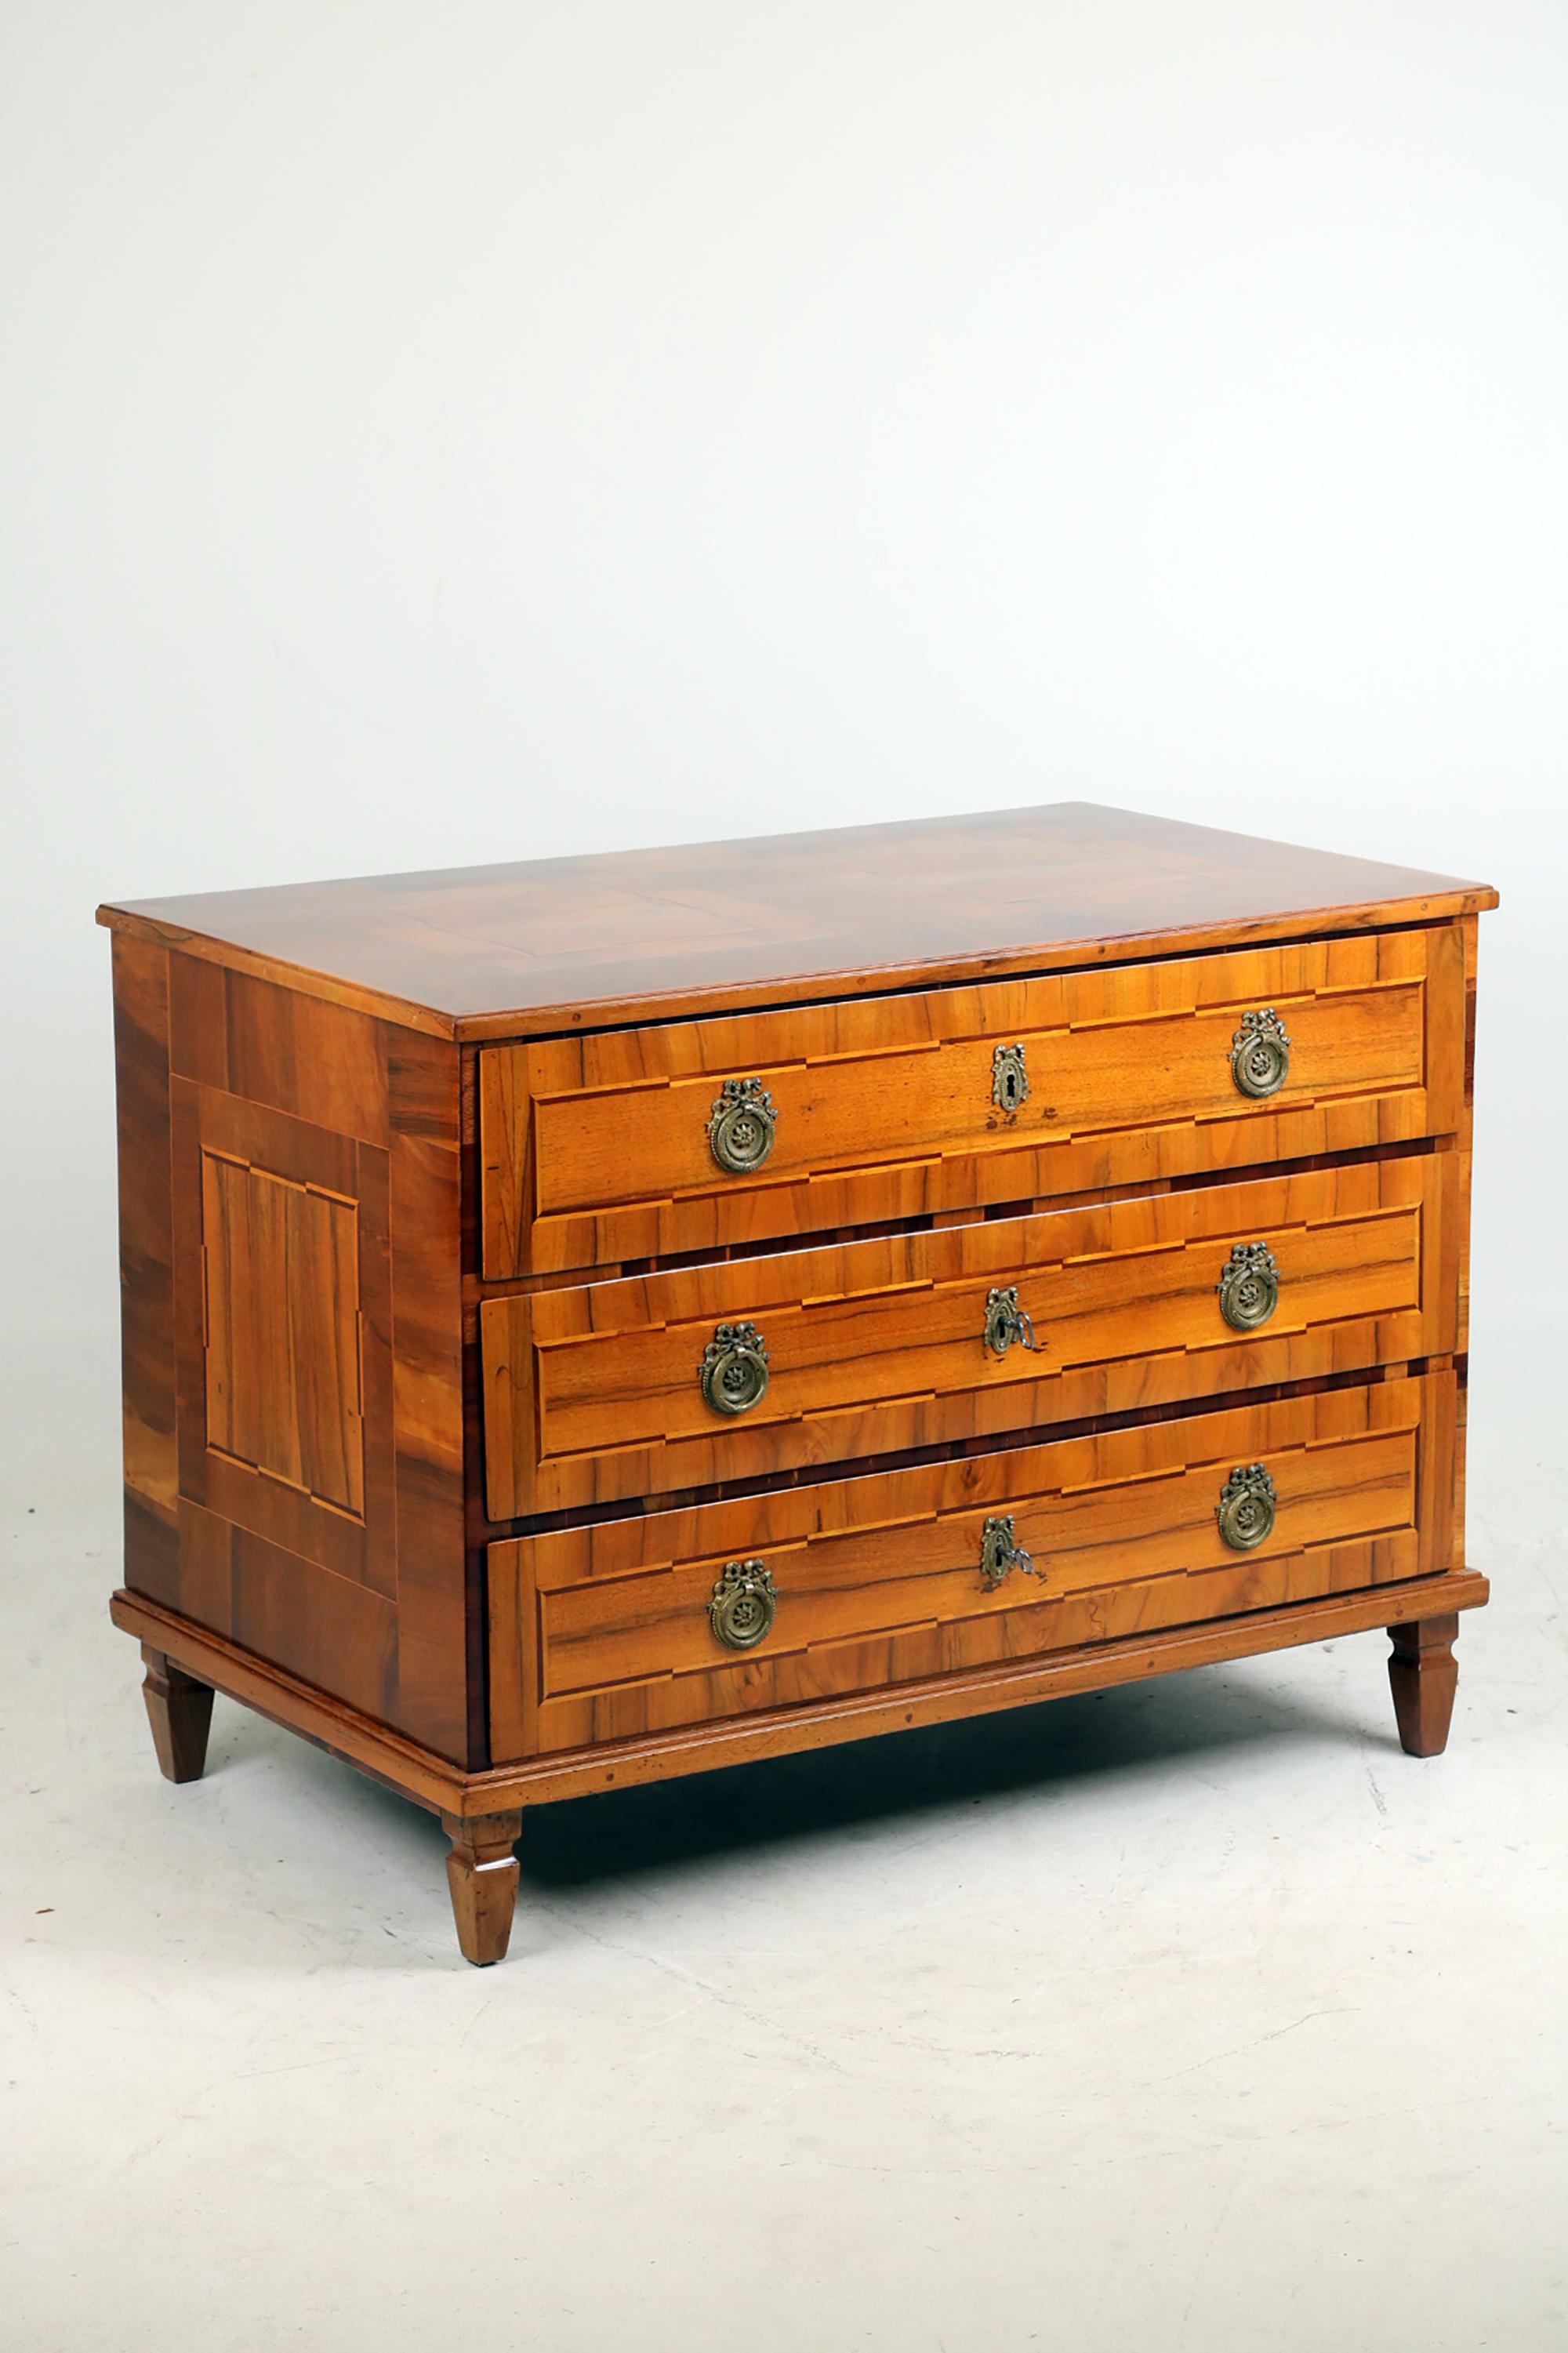 Louis Seize Commode 1790, Germany

Chest of drawers veneered in walnut, top panel fielded in 2 compartments, with beautiful bandwork also on the drawers, side walls inlaid with a large field, 3 drawers with box locks, 3 keys, fittings. The body